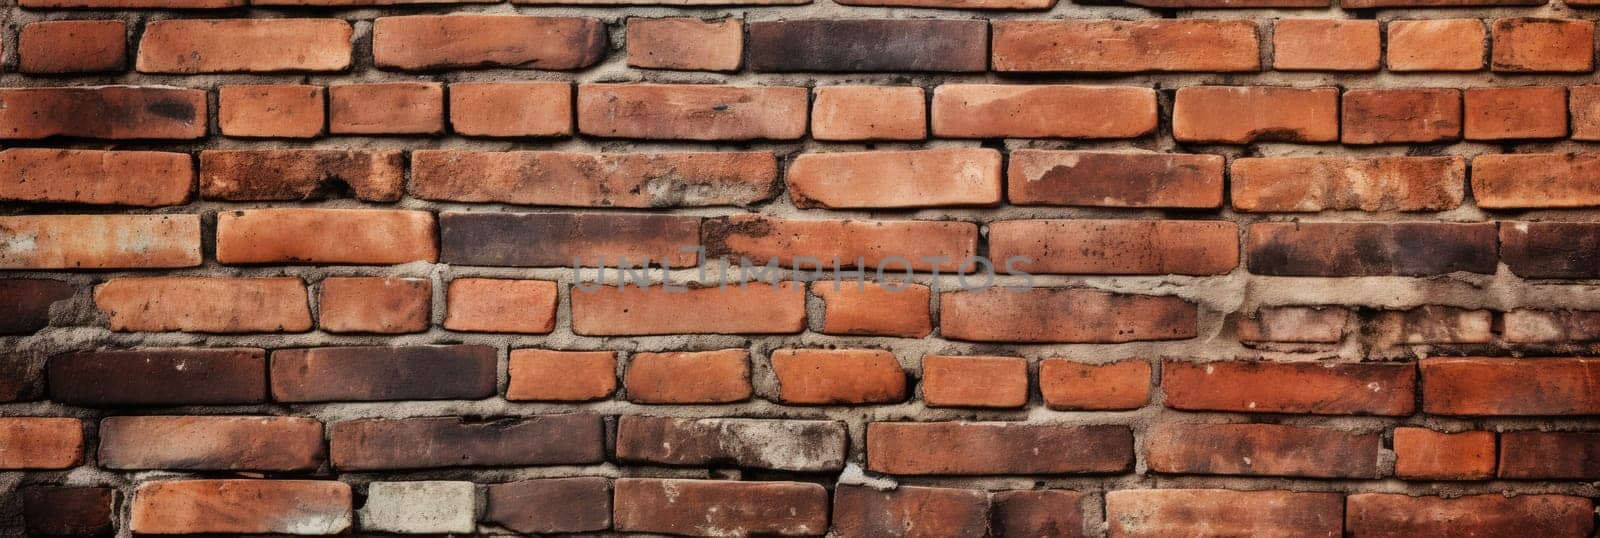 Abstract grunge brick wall texture background. Long website header or banner format. AI